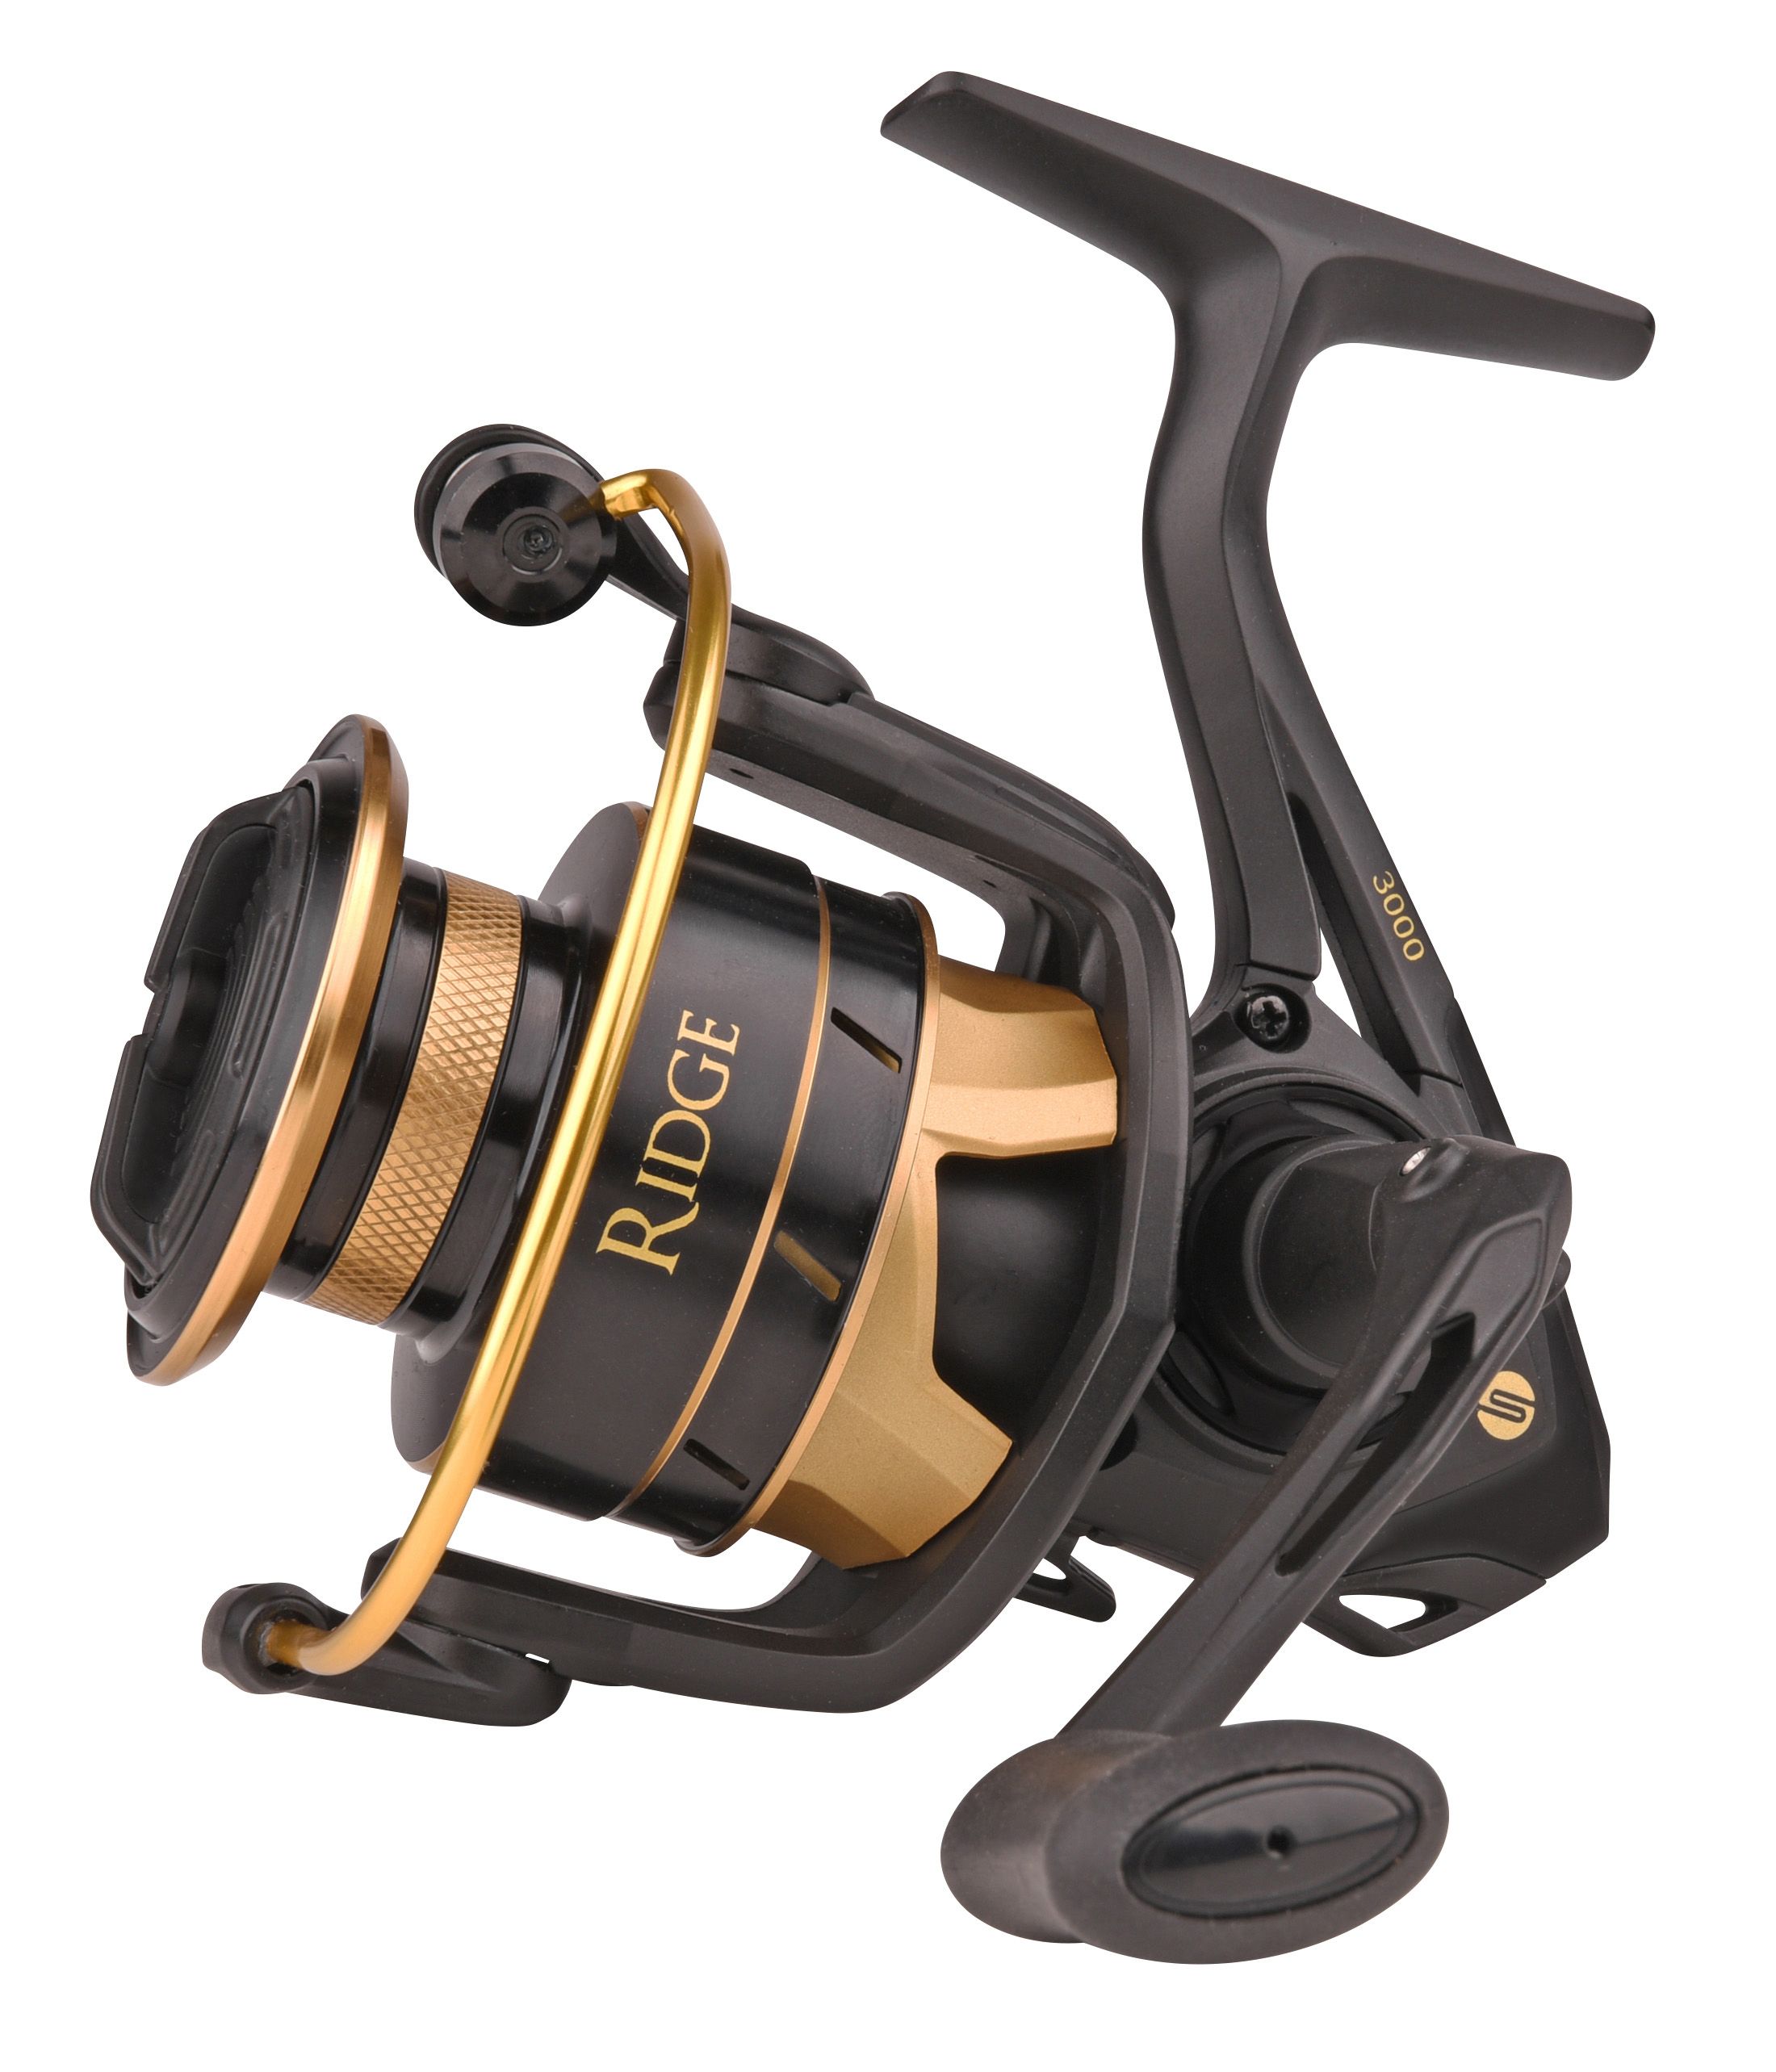 SPRO Spinning Fishing Reel Reels for sale